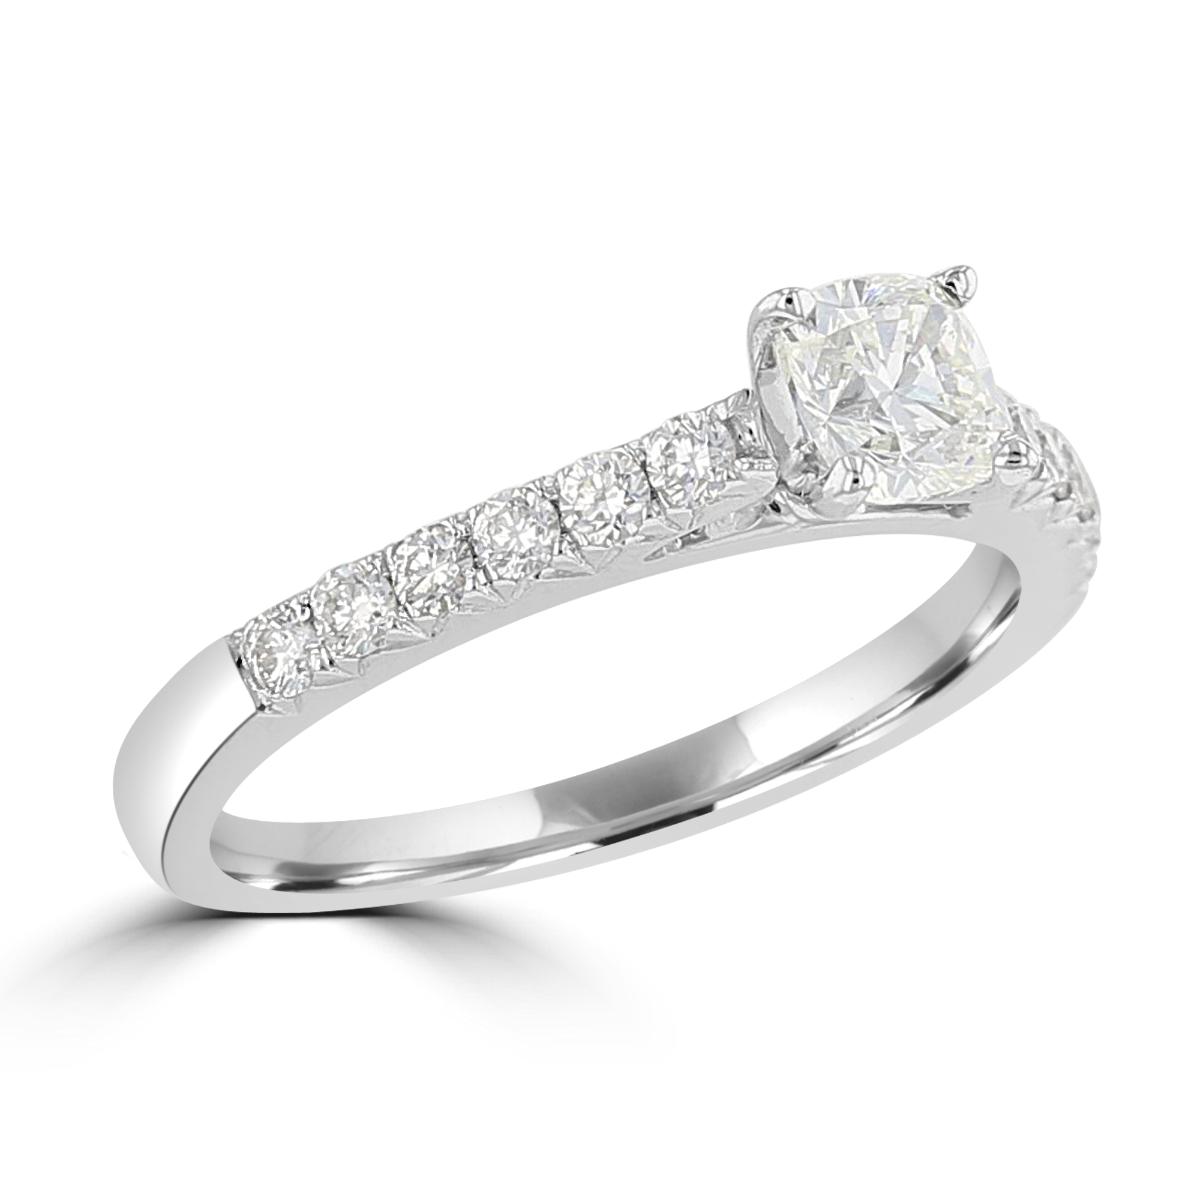 14KT White Gold 3/4 CTW Cushion Diamond Cathedral Ring 4,4.5,5,5.5,6,6.5,7,7.5,8,8.5,9